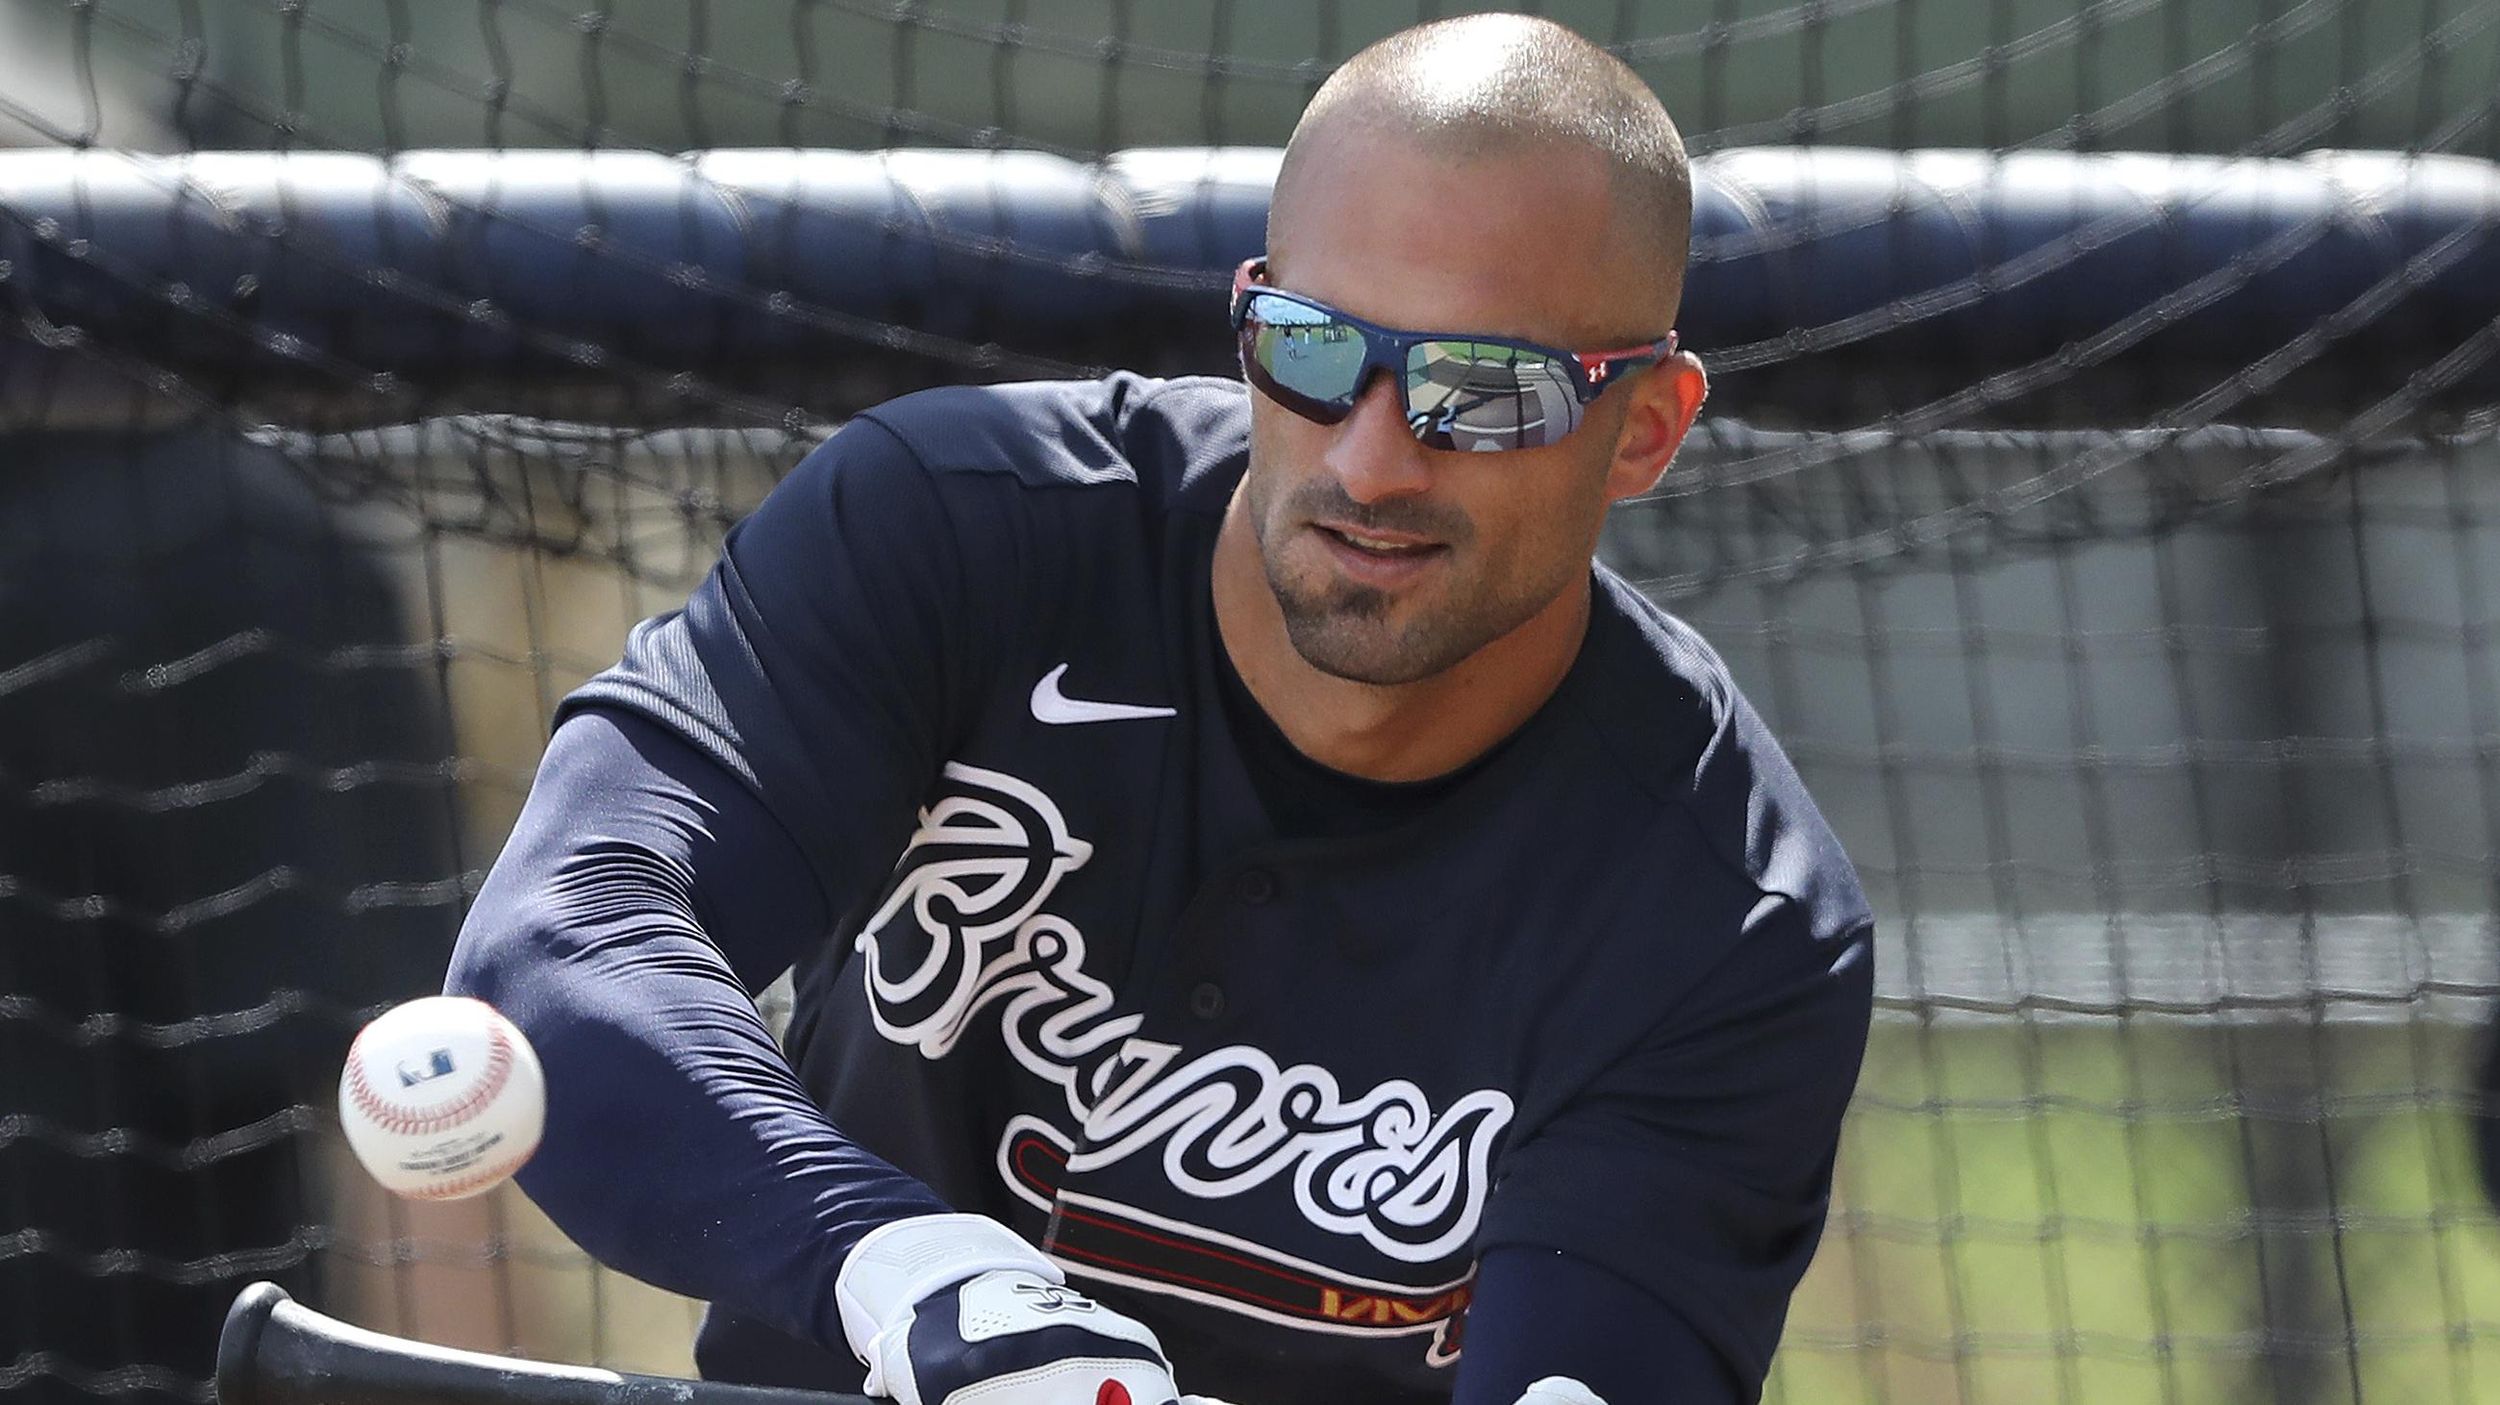 Five genius Nick Markakis promotions for the Braves to implement